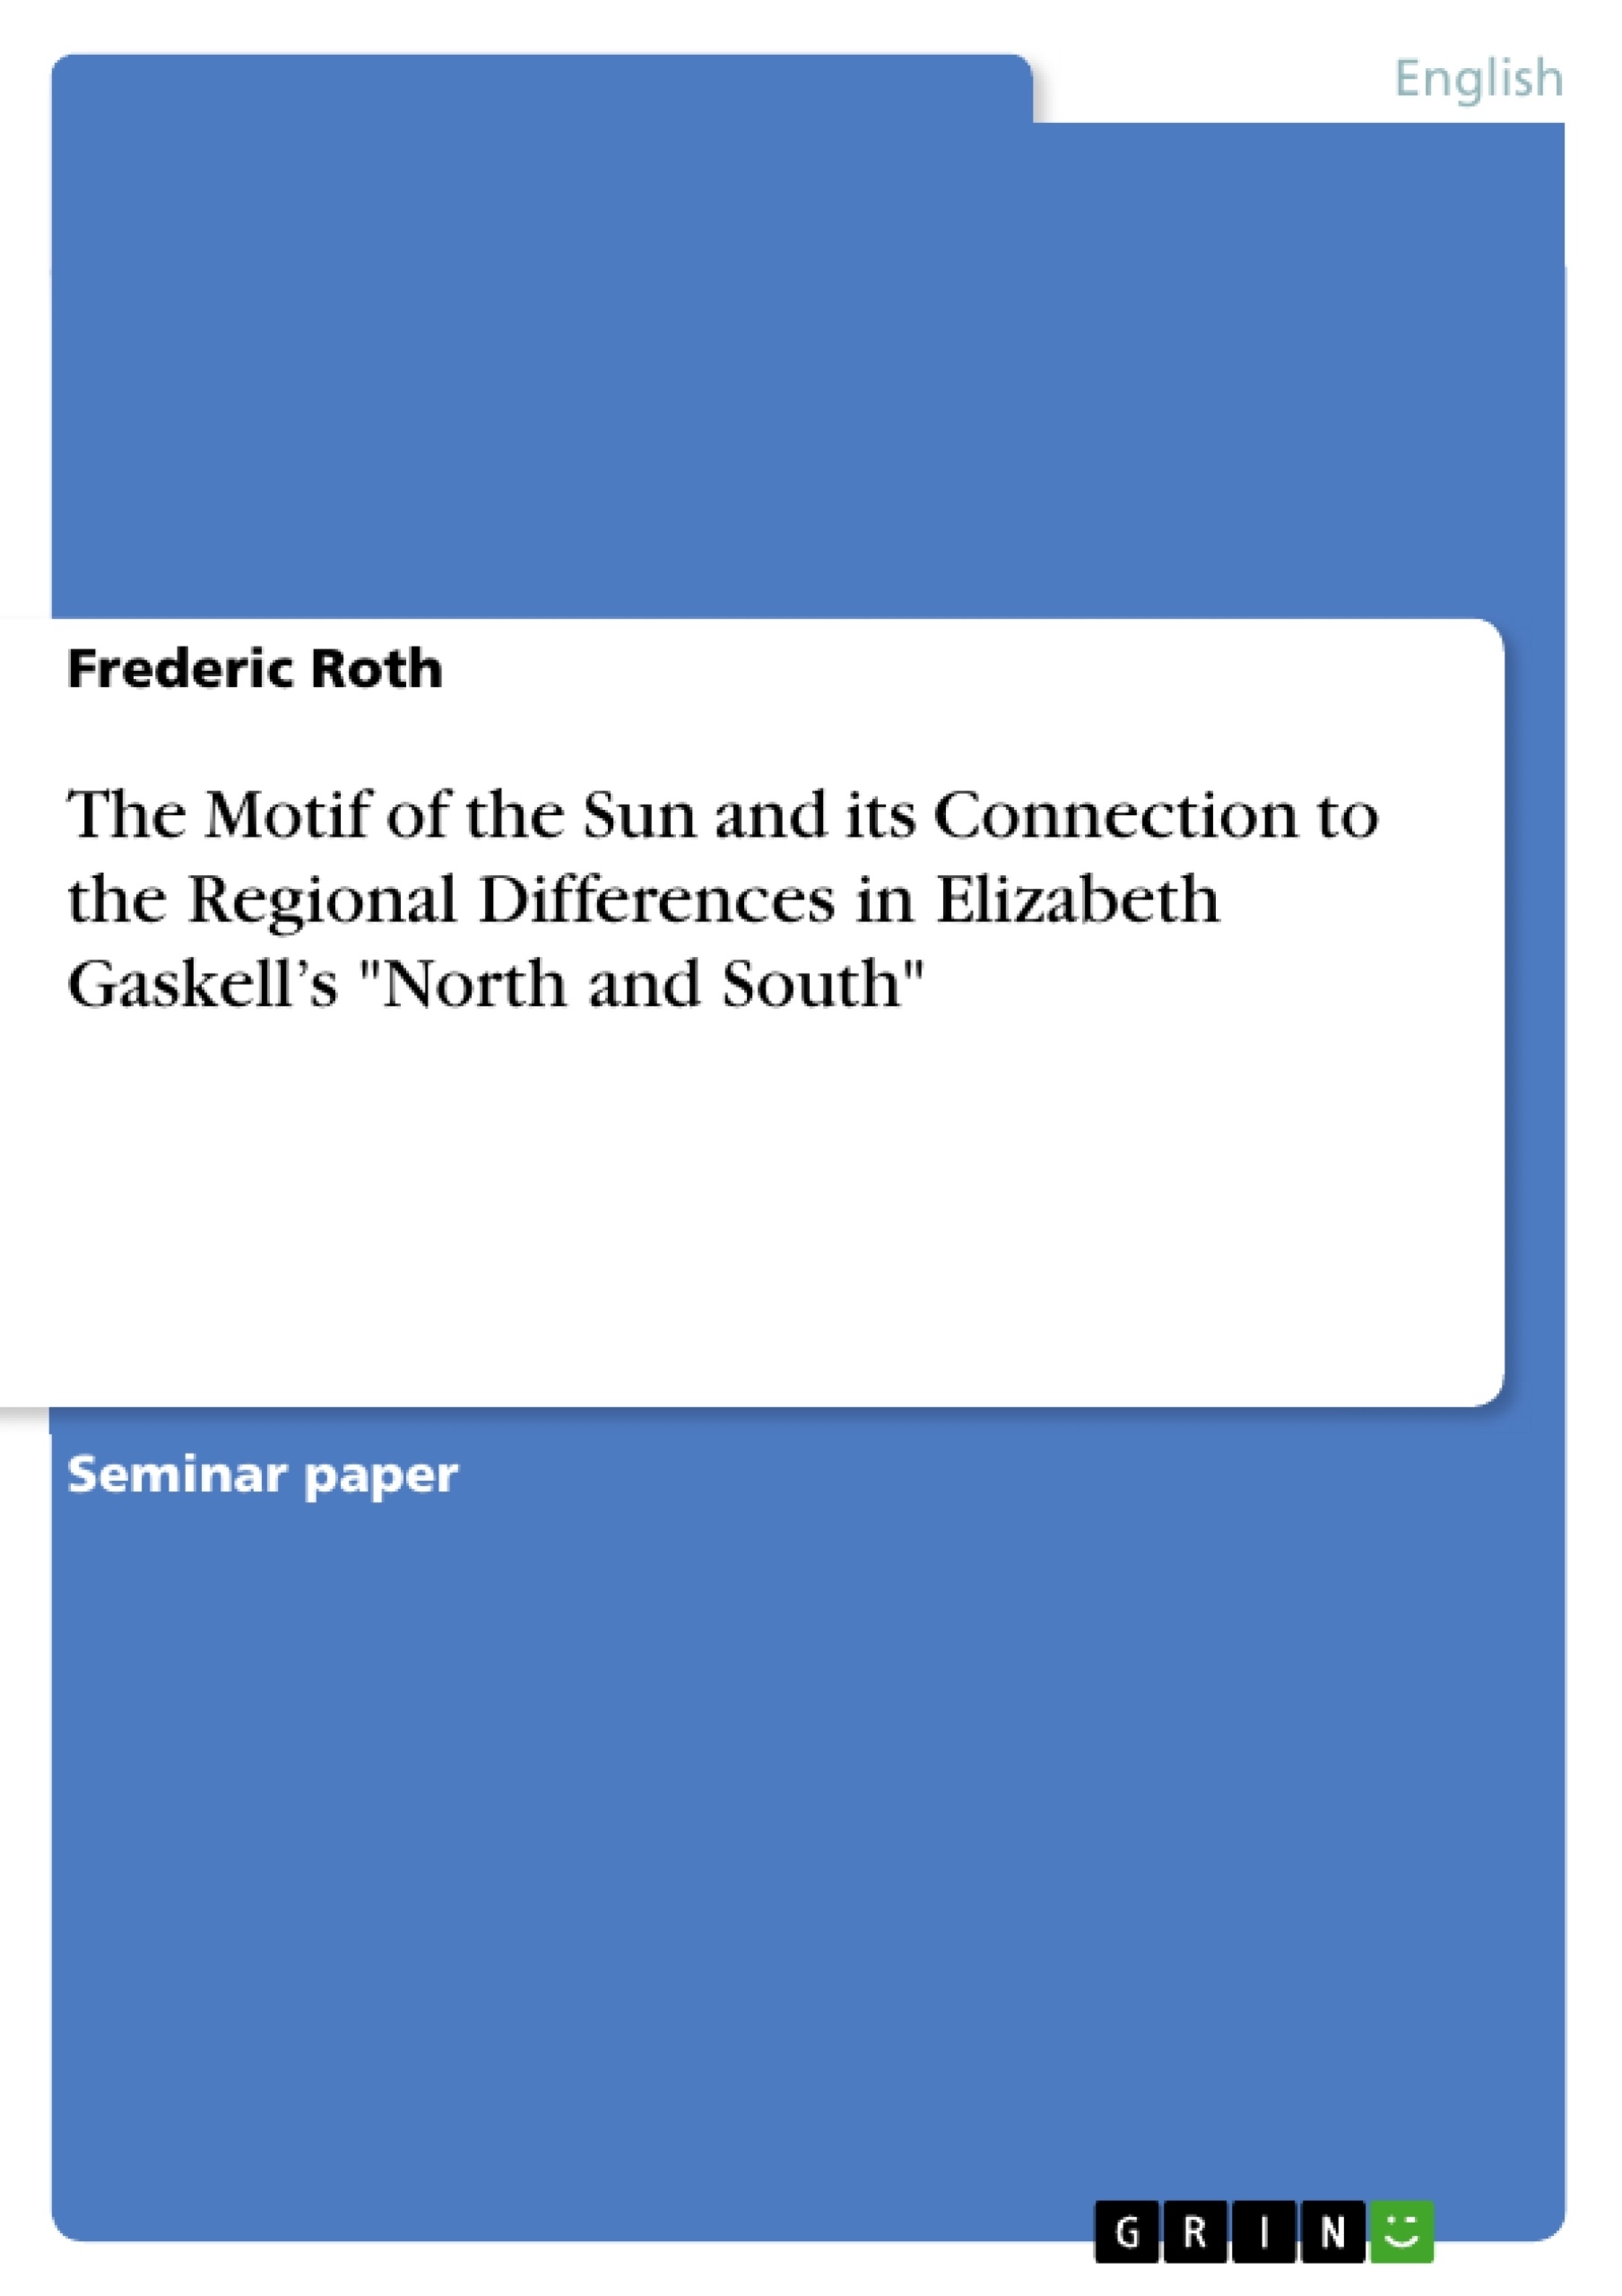 Title: The Motif of the Sun and its Connection to the Regional Differences  in Elizabeth Gaskell’s "North and South"